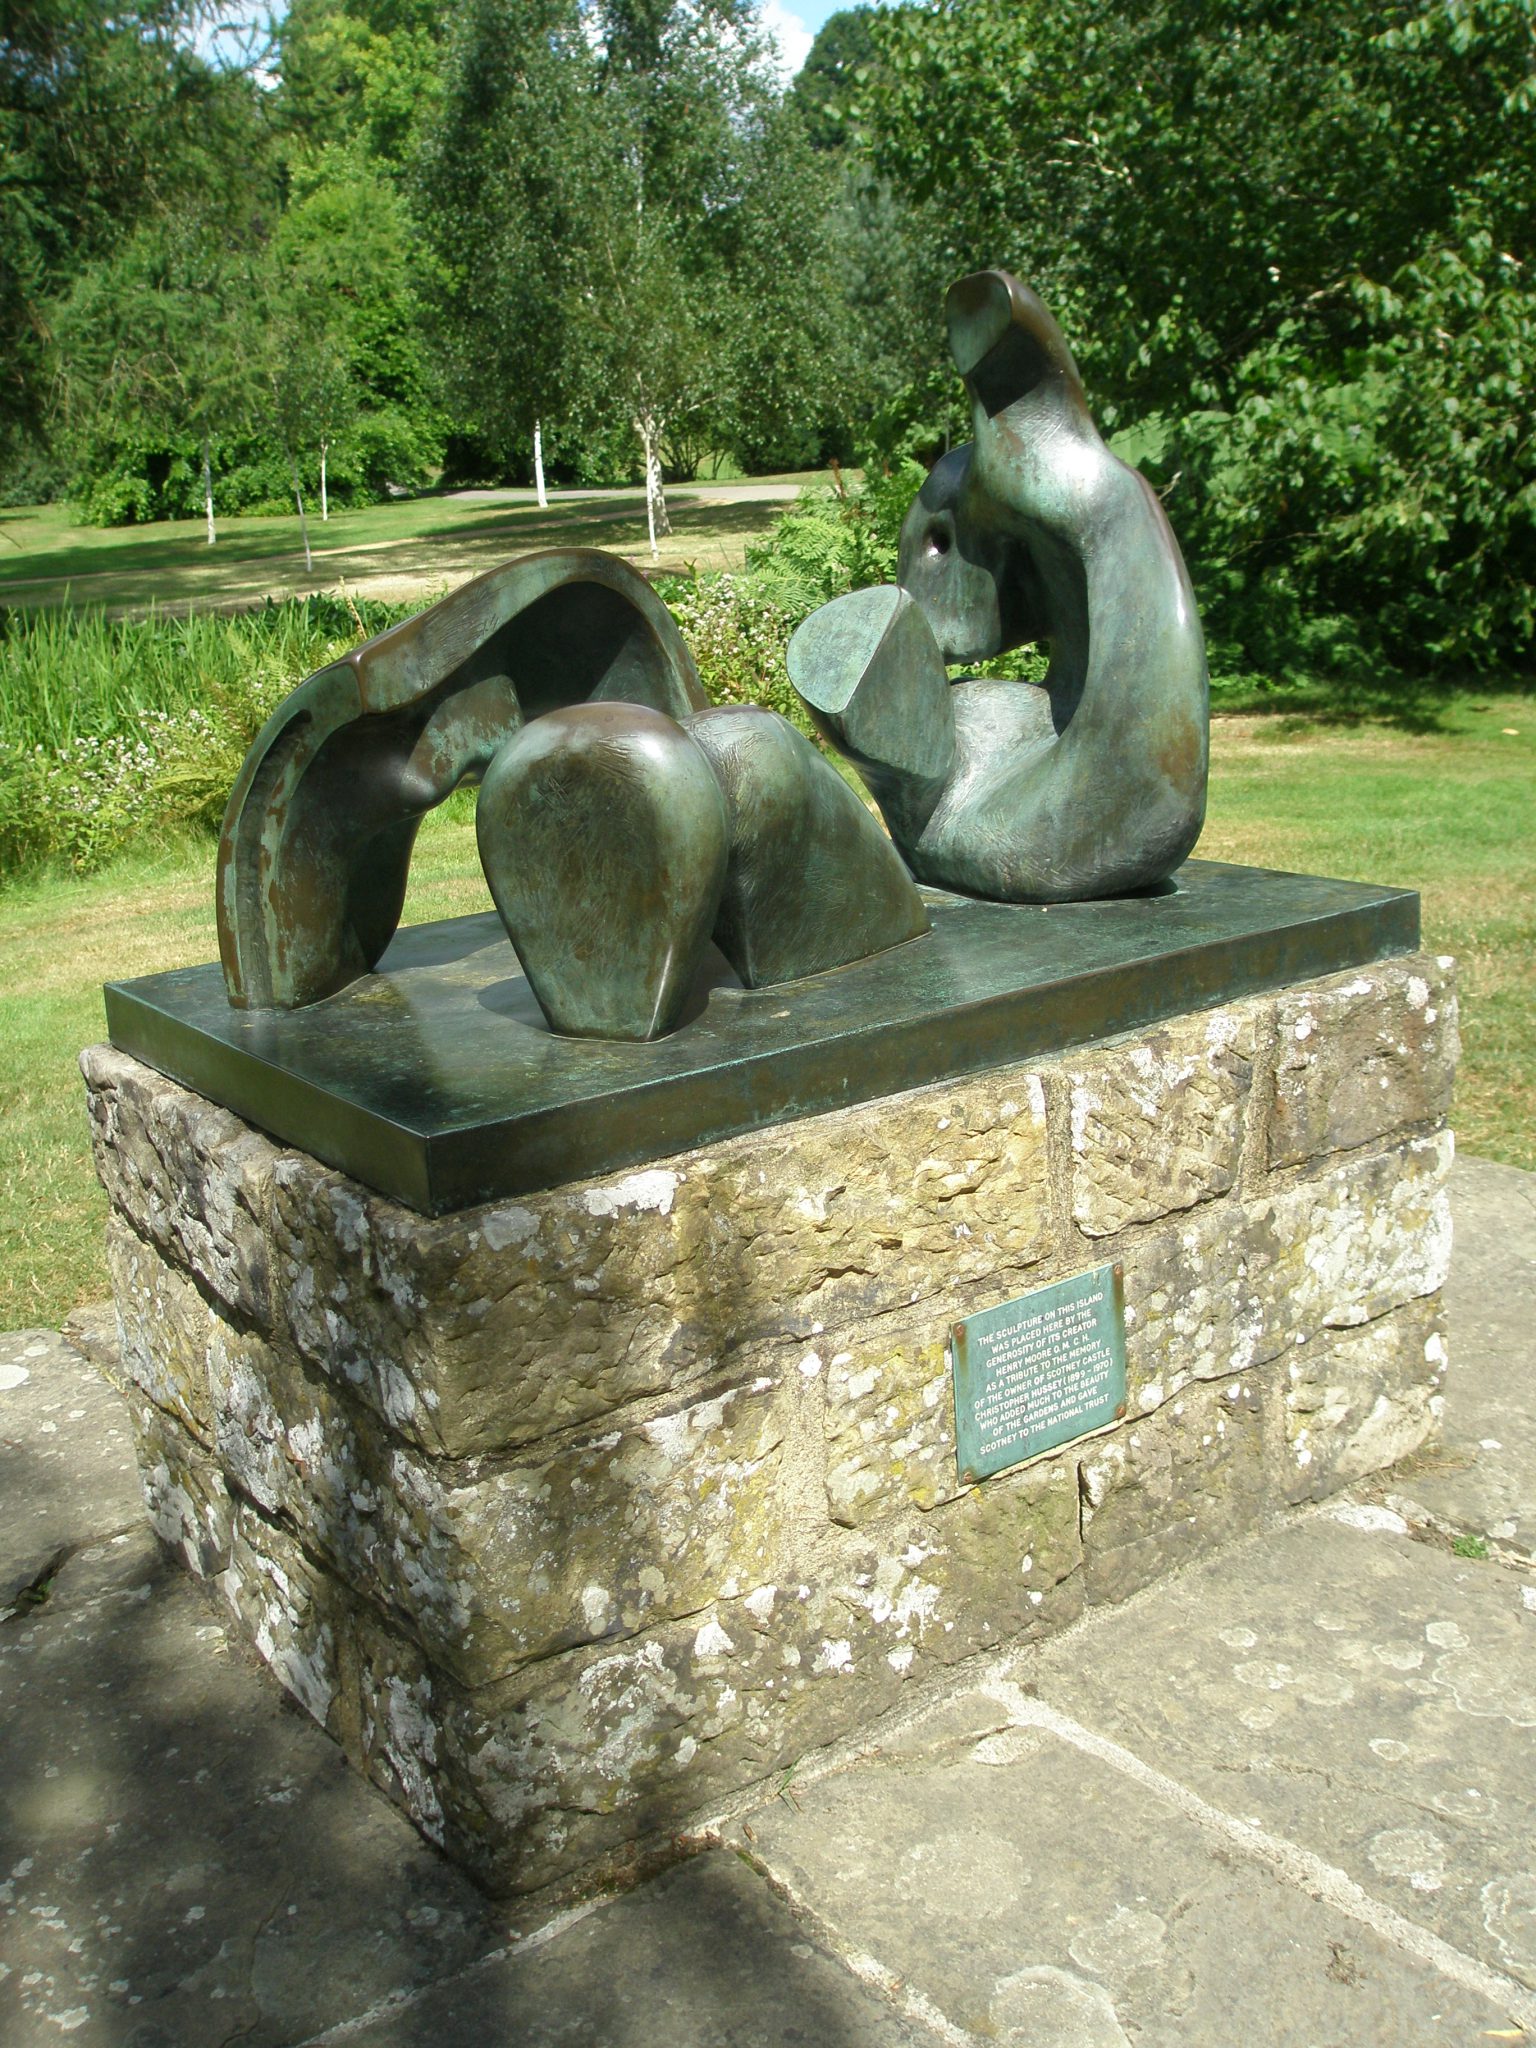 THREE PIECE RECLINING FIGURE. 1977. By Henry Moore. Moore donated this piece, in memory of his friend, Christopher Hussey.